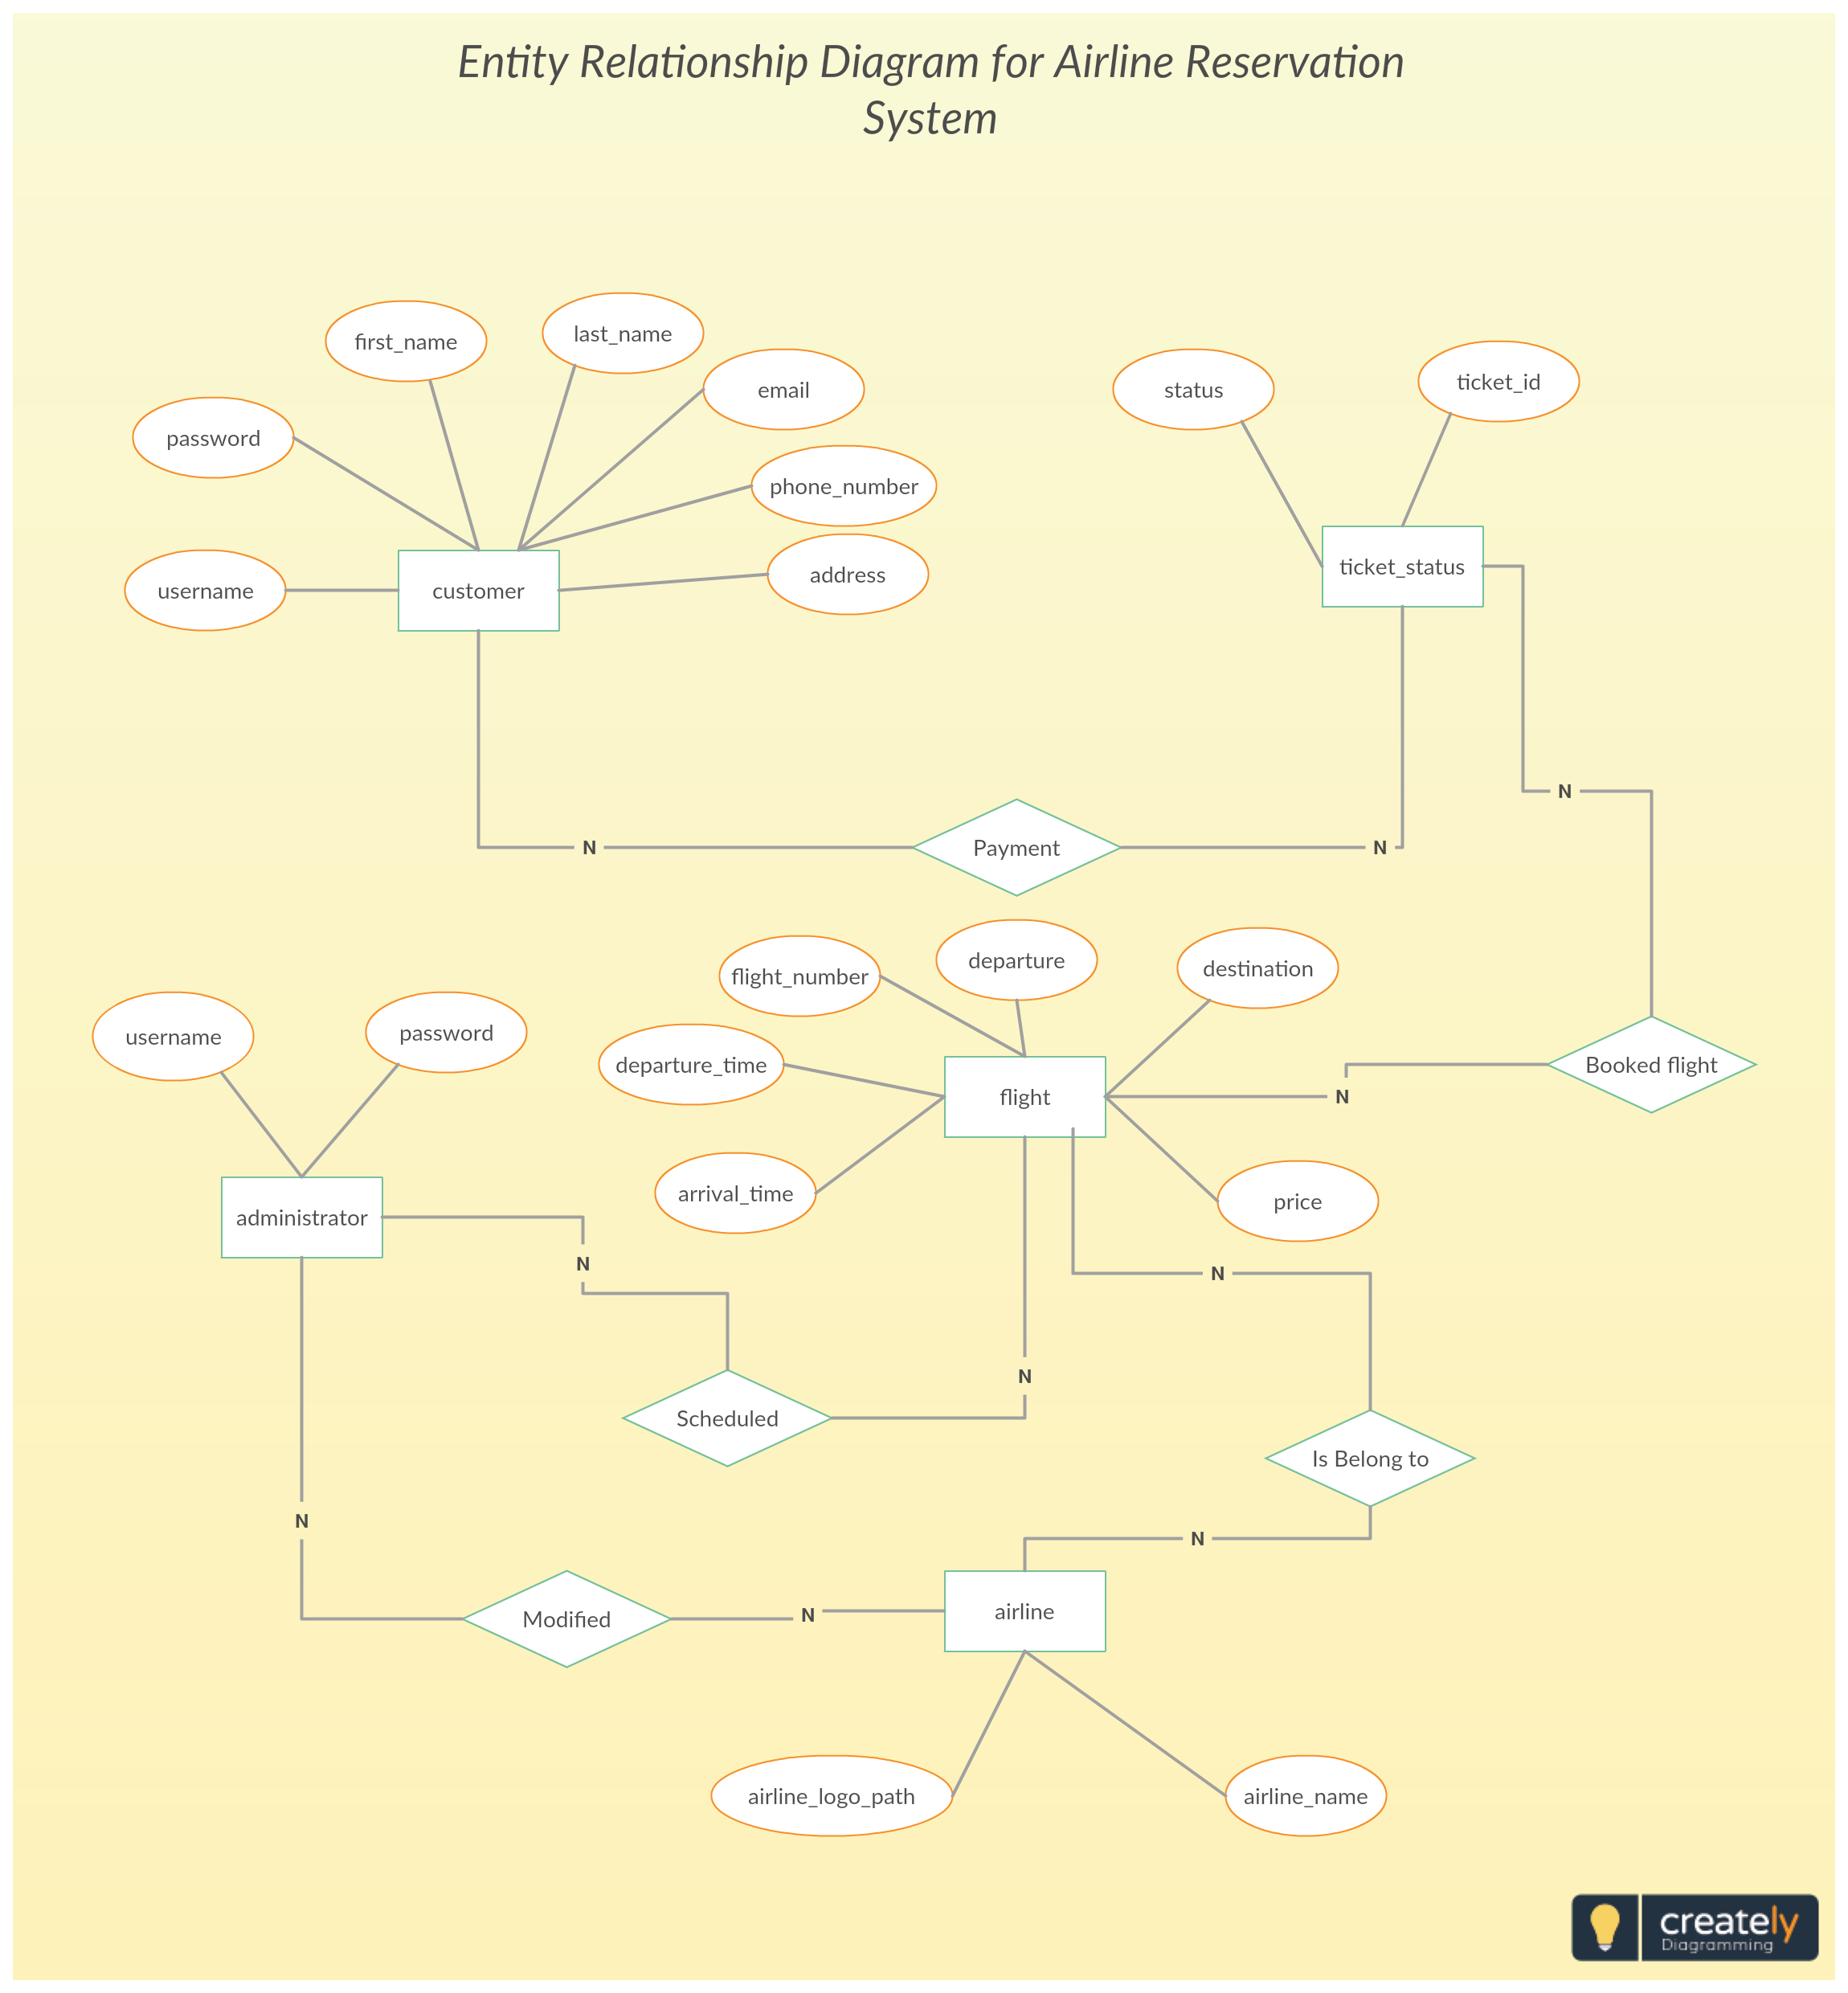 Entity Relationship Diagram For Airline Reservation System within Er Diagram With 6 Entities